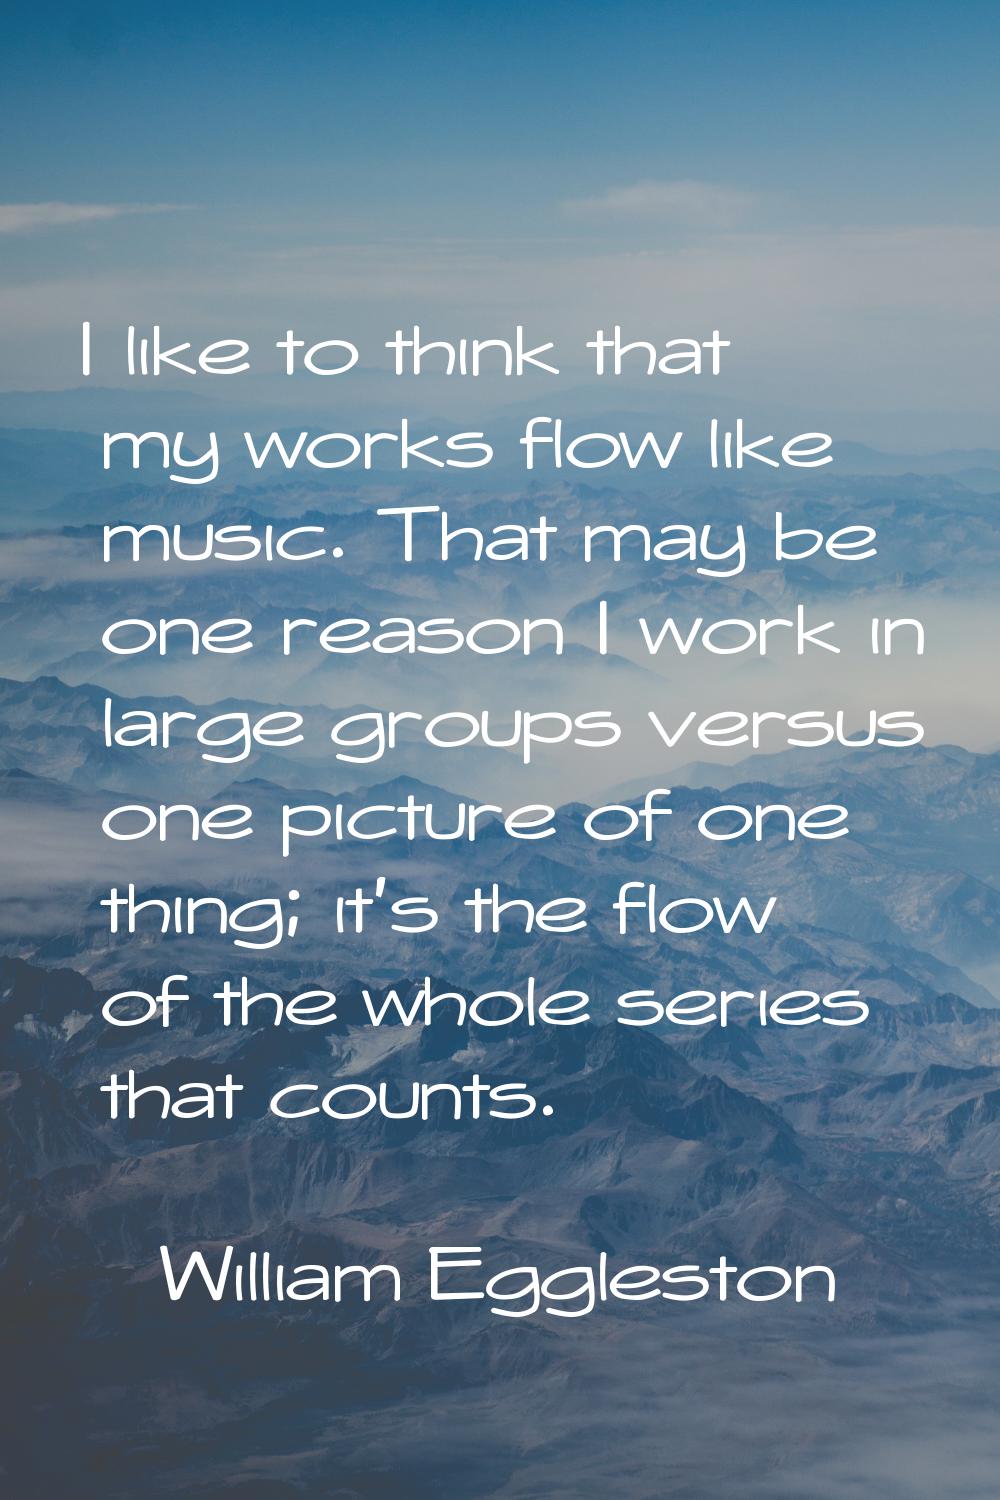 I like to think that my works flow like music. That may be one reason I work in large groups versus